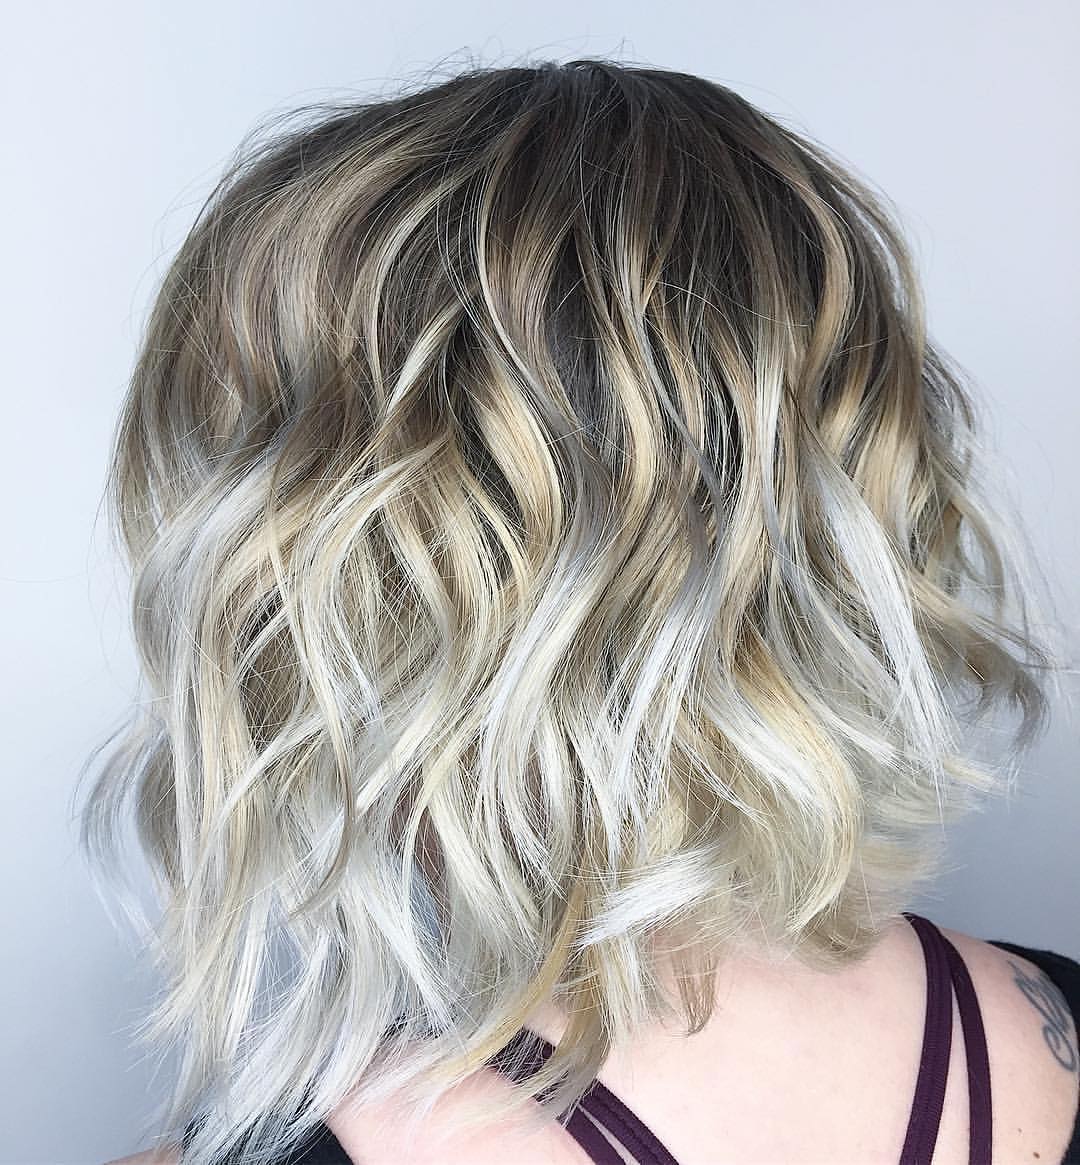 Curly Blonde Hairstyle with Silver Highlights